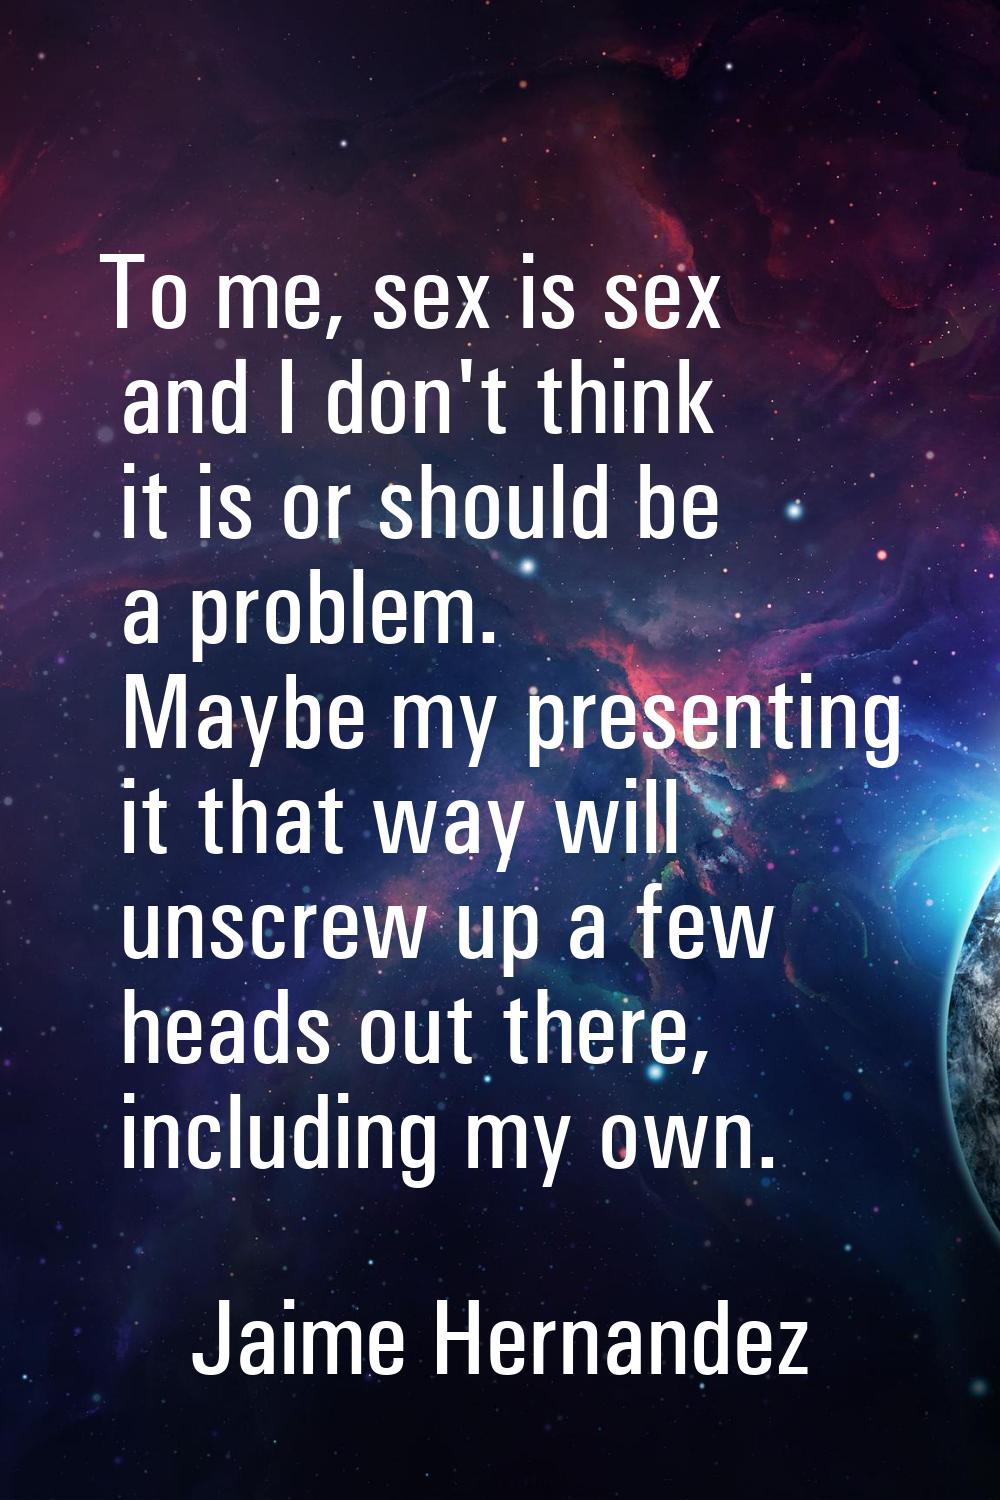 To me, sex is sex and I don't think it is or should be a problem. Maybe my presenting it that way w